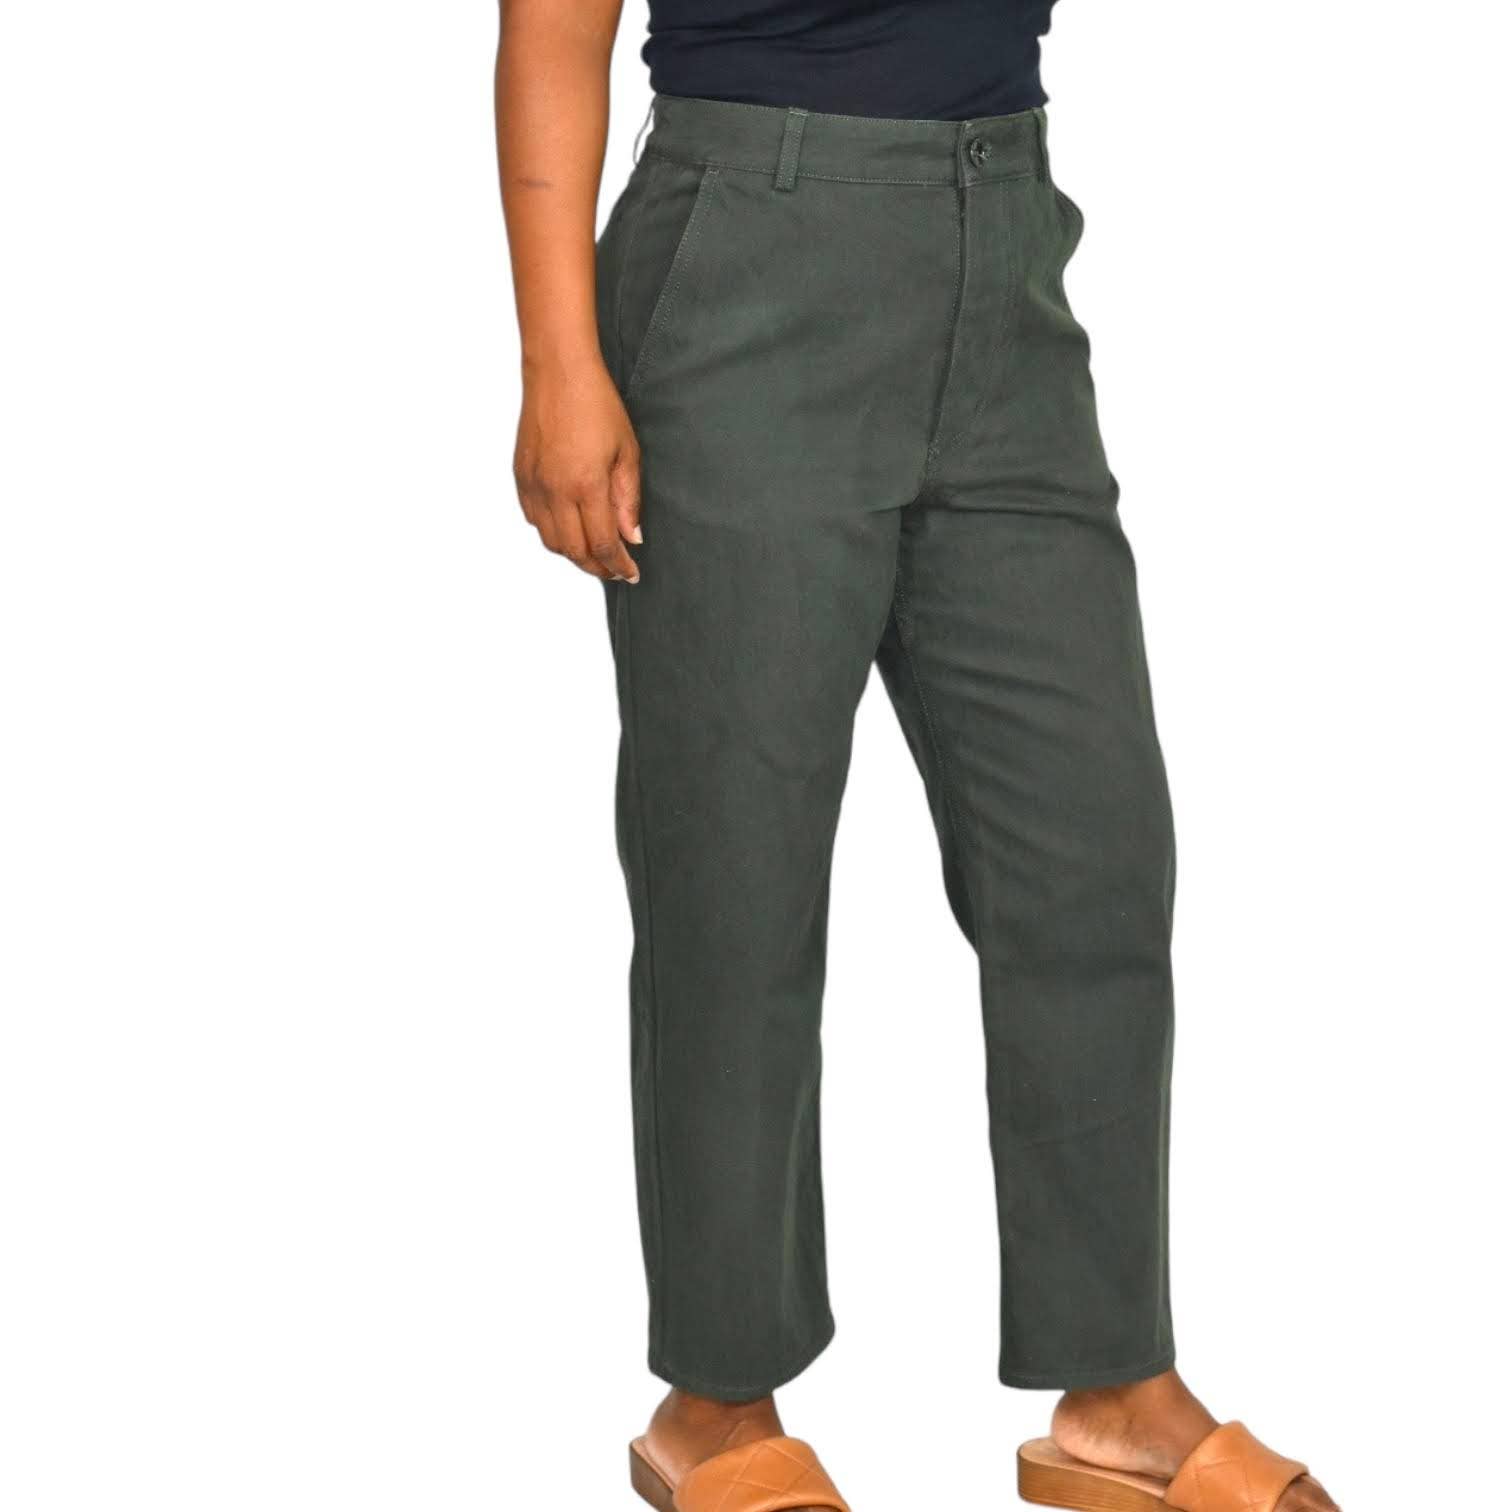 COS Pants Olive Green Button Fly Trousers High Waist Ankle Straight Chino Size 6